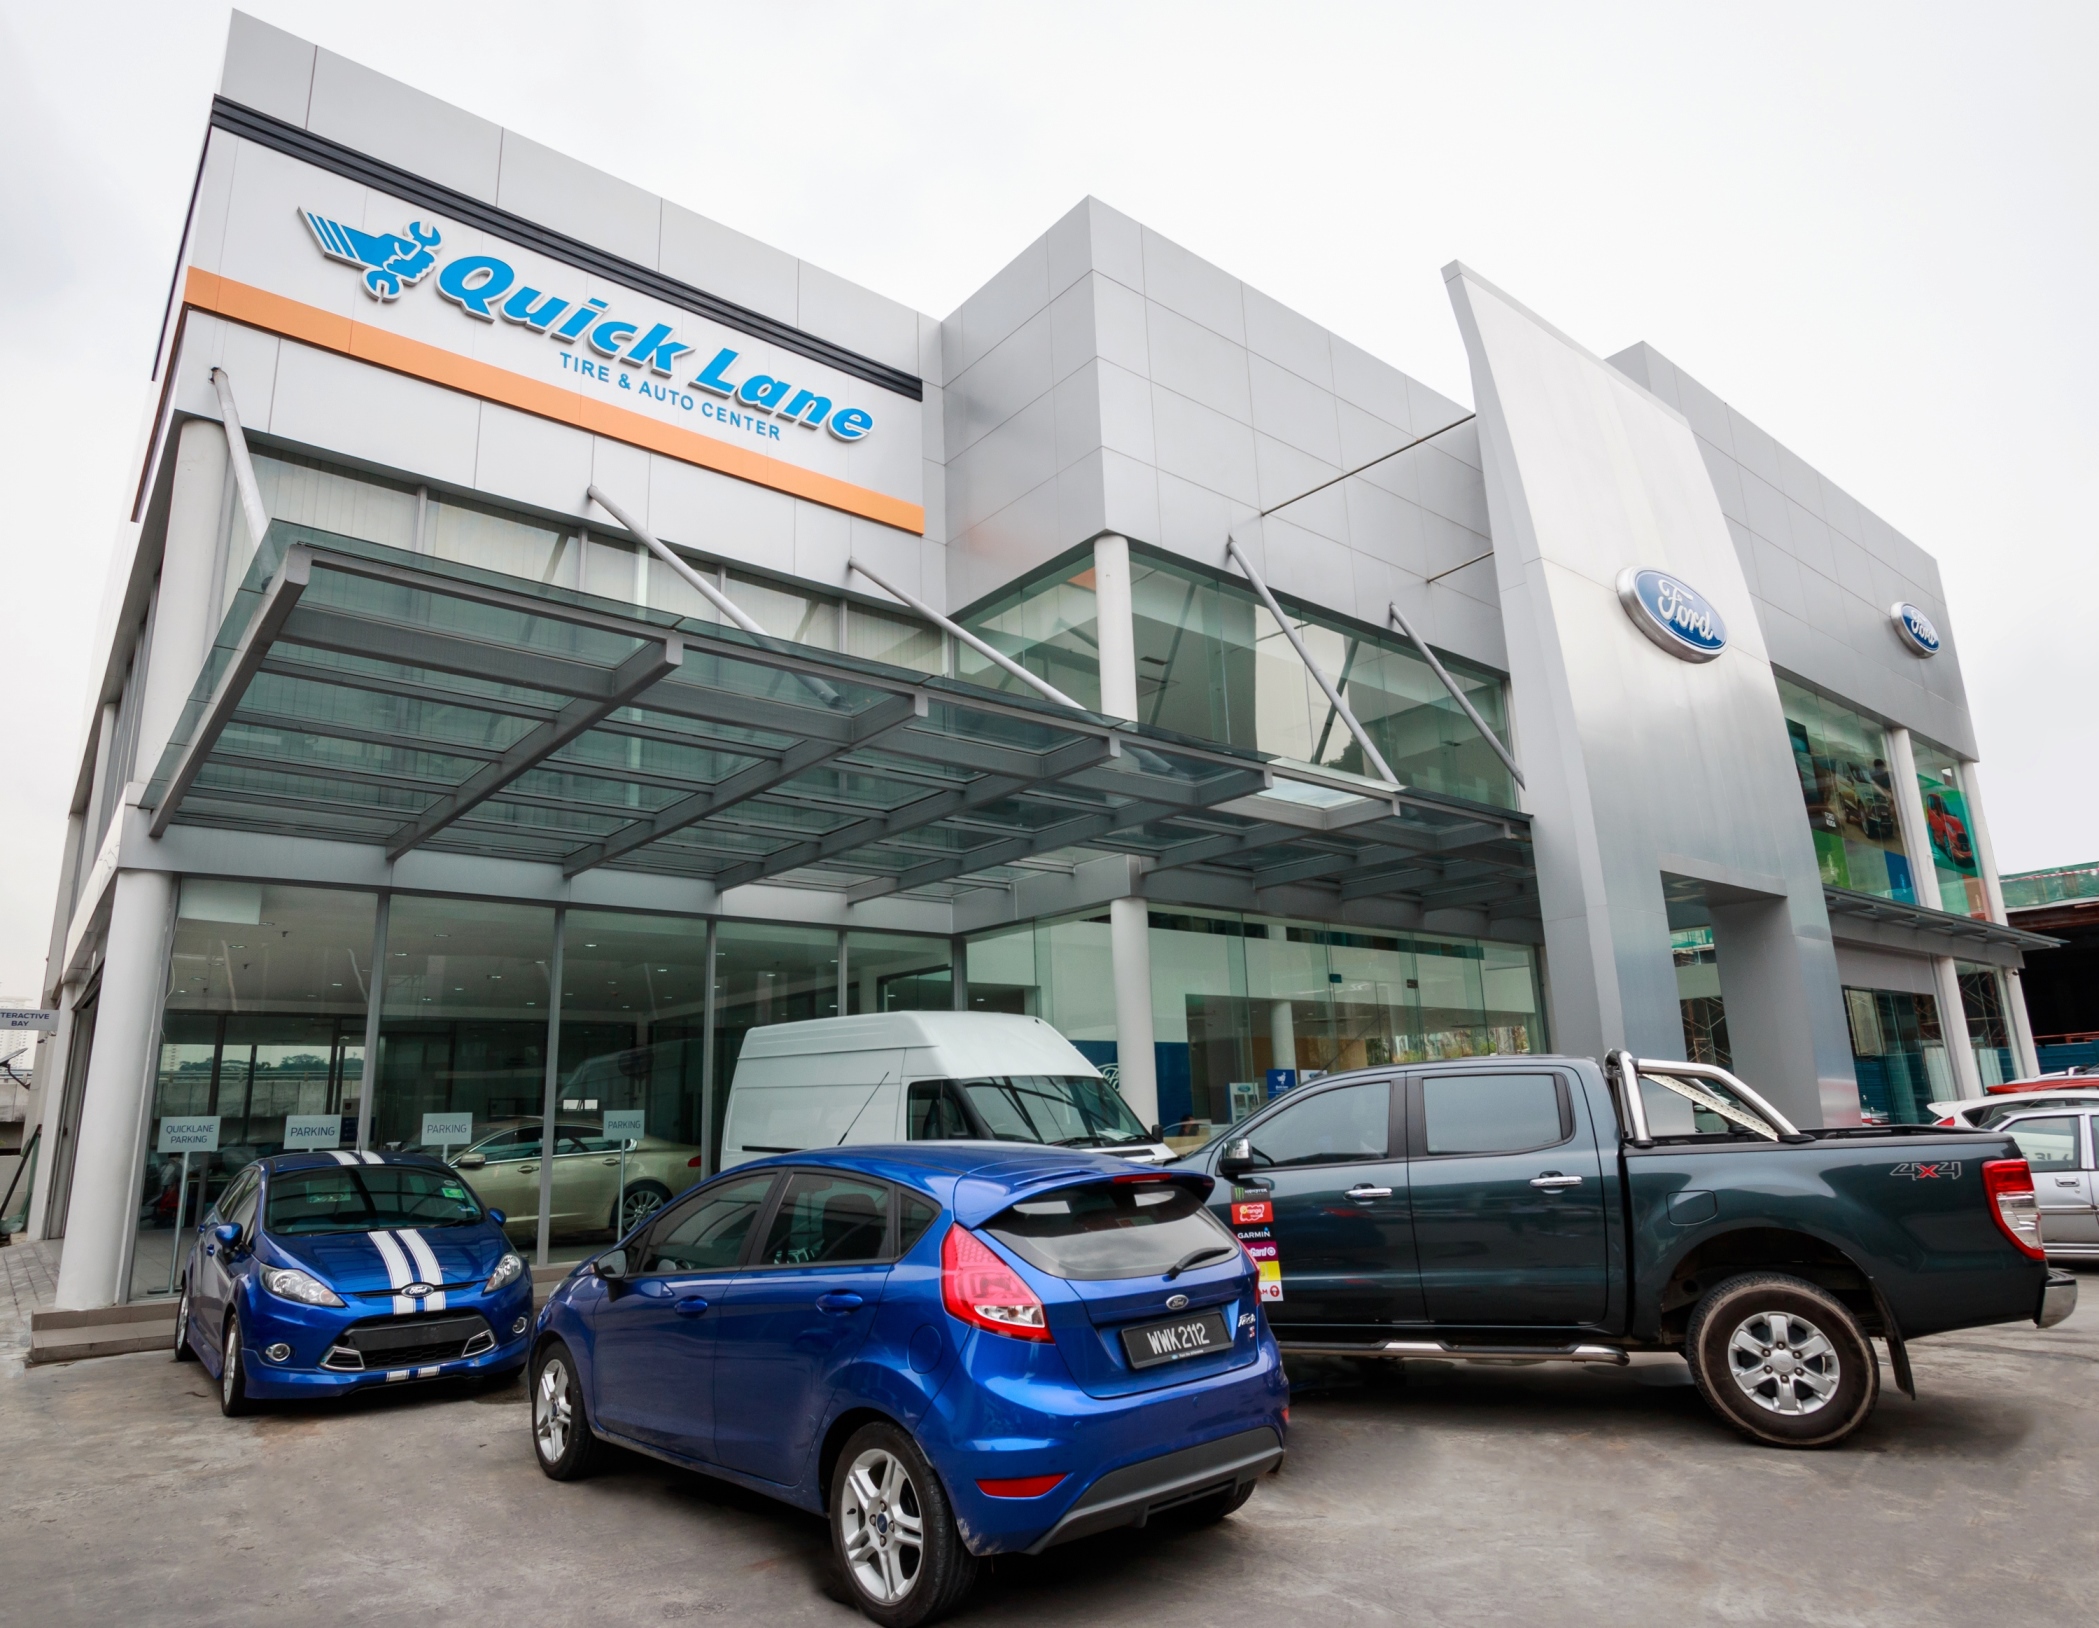 nine-ford-quick-lane-service-centres-open-in-p-m-sia-ford-quick-lane